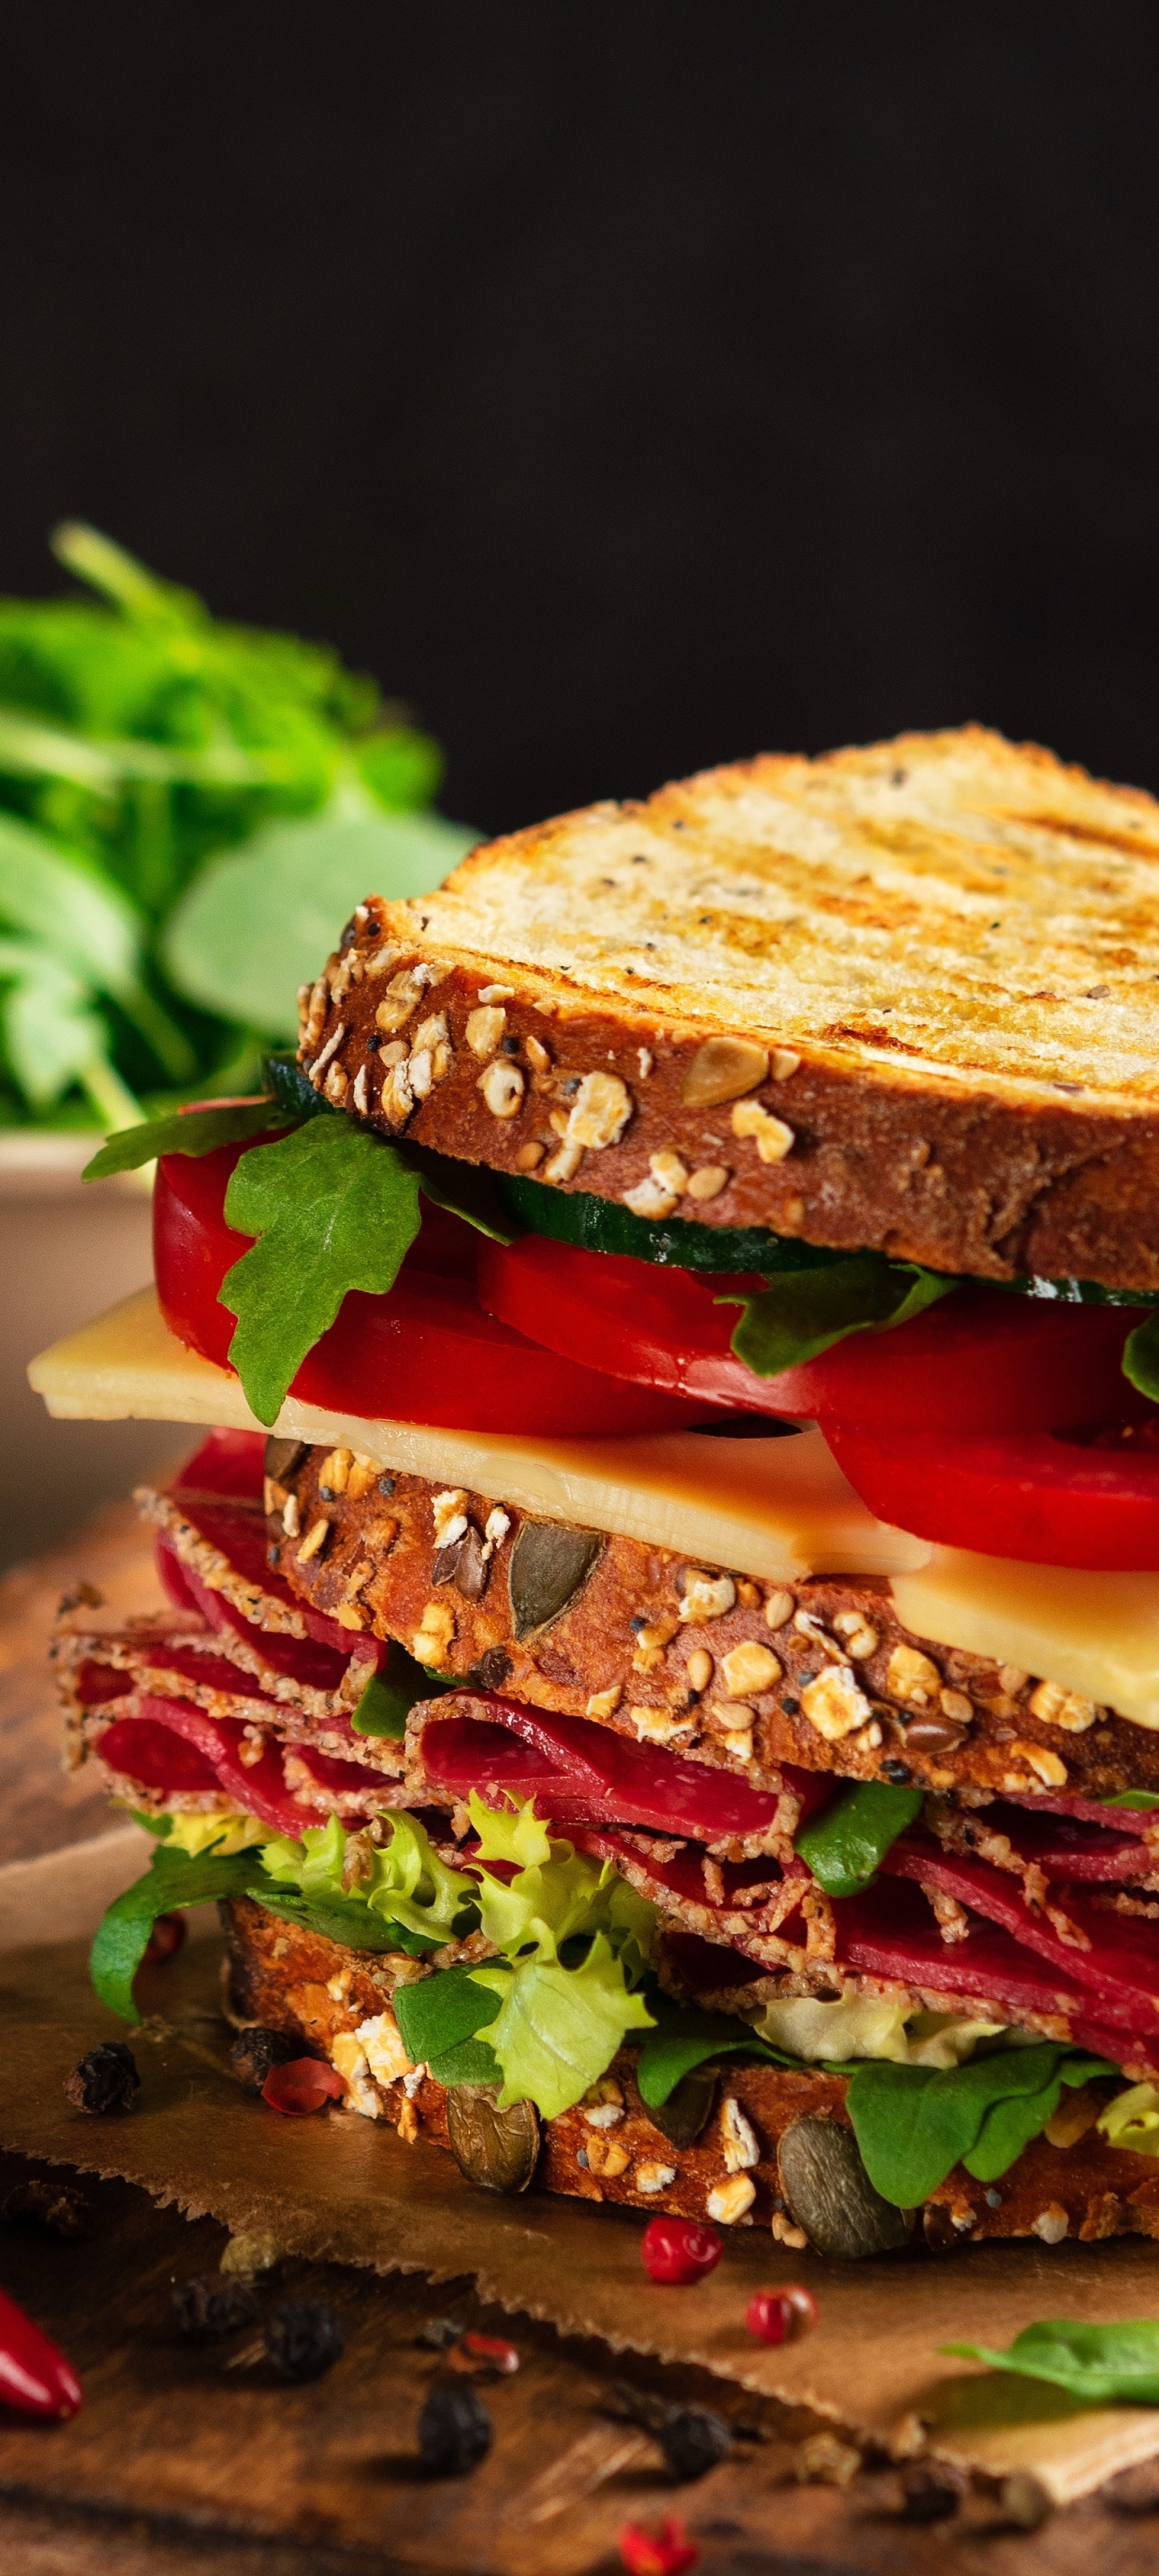 Sandwich: A food item typically consisting of two slices of bread. 1440x3200 HD Background.